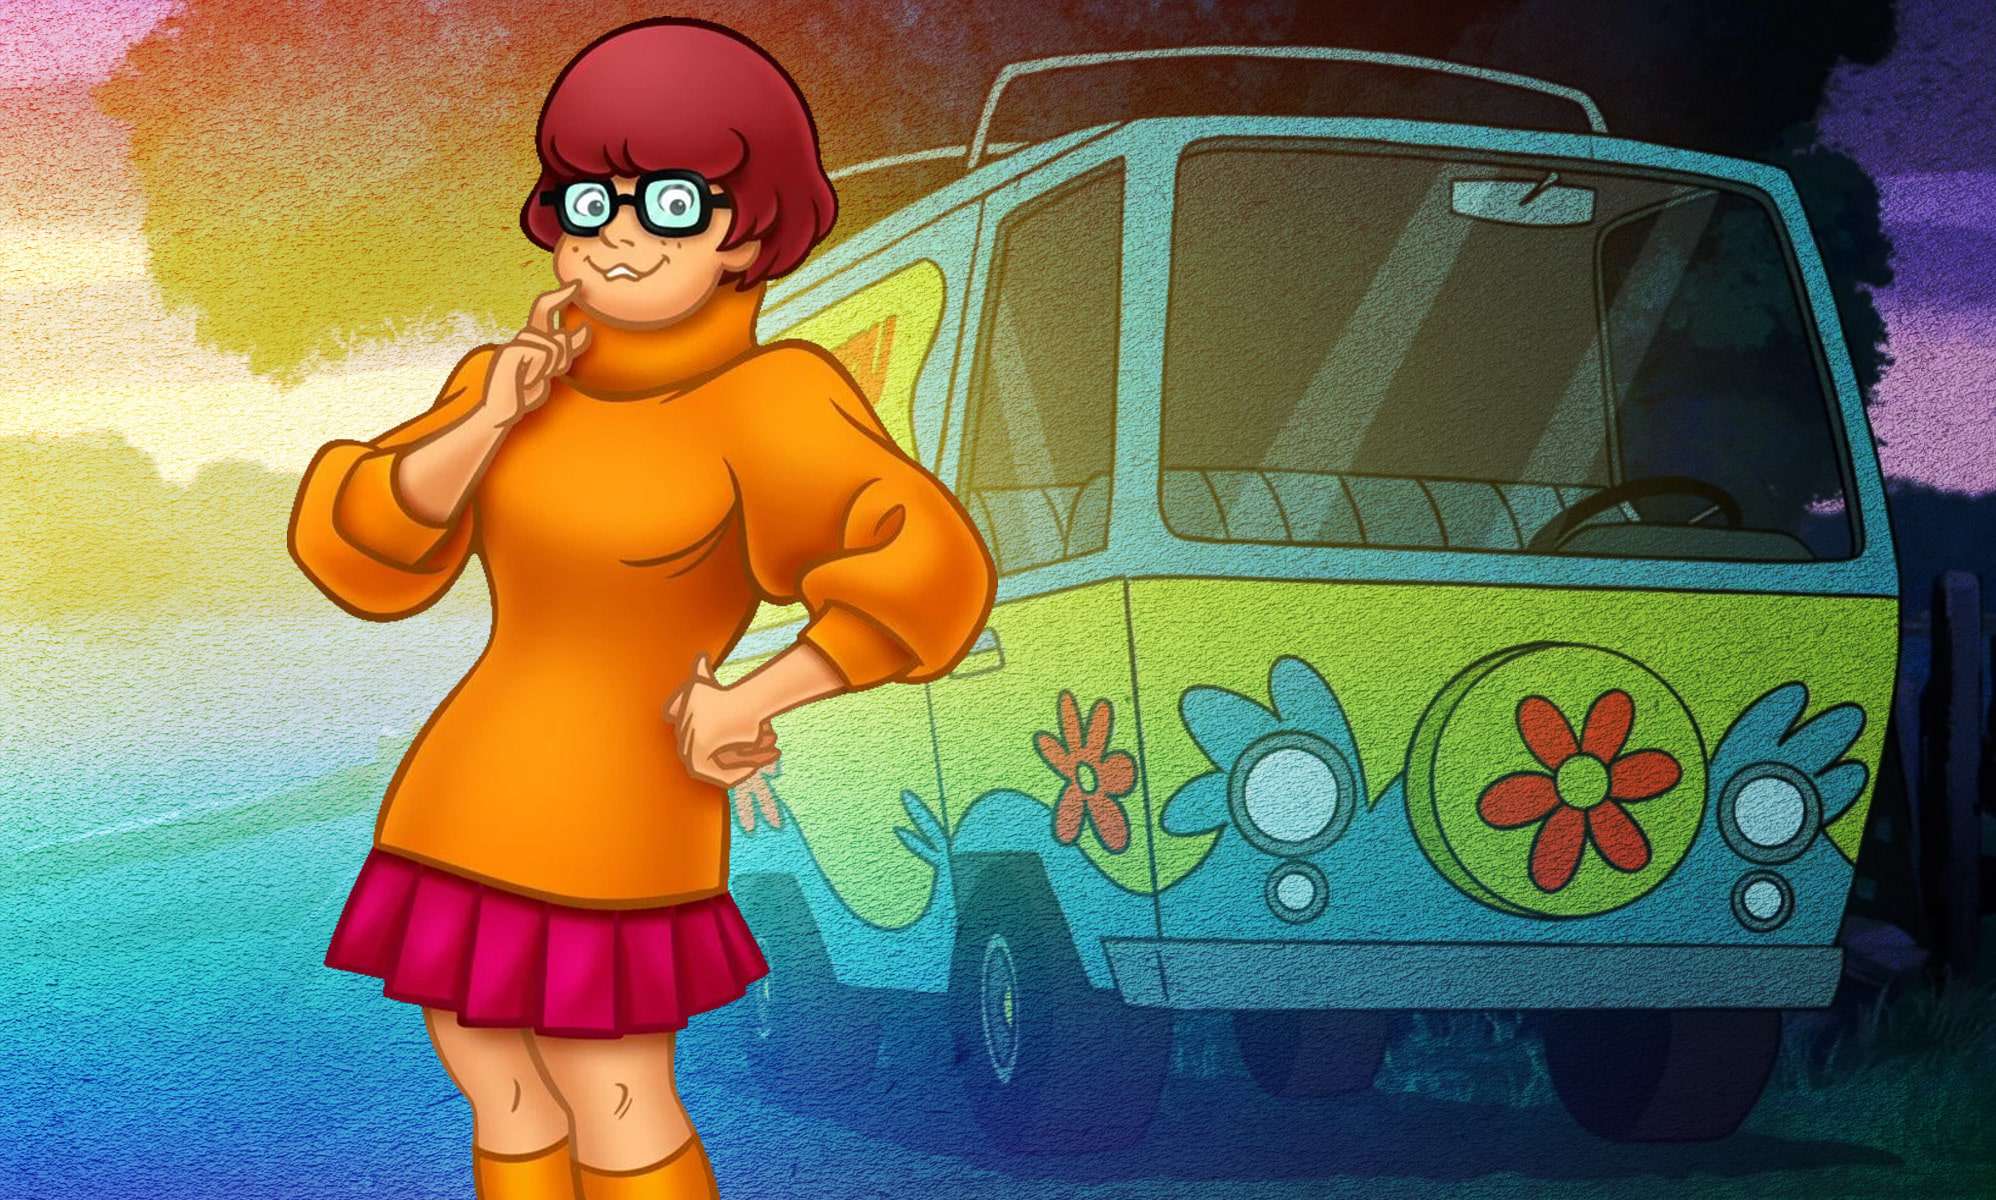 Velma in the movie Scooby-Doo about to say jinkies